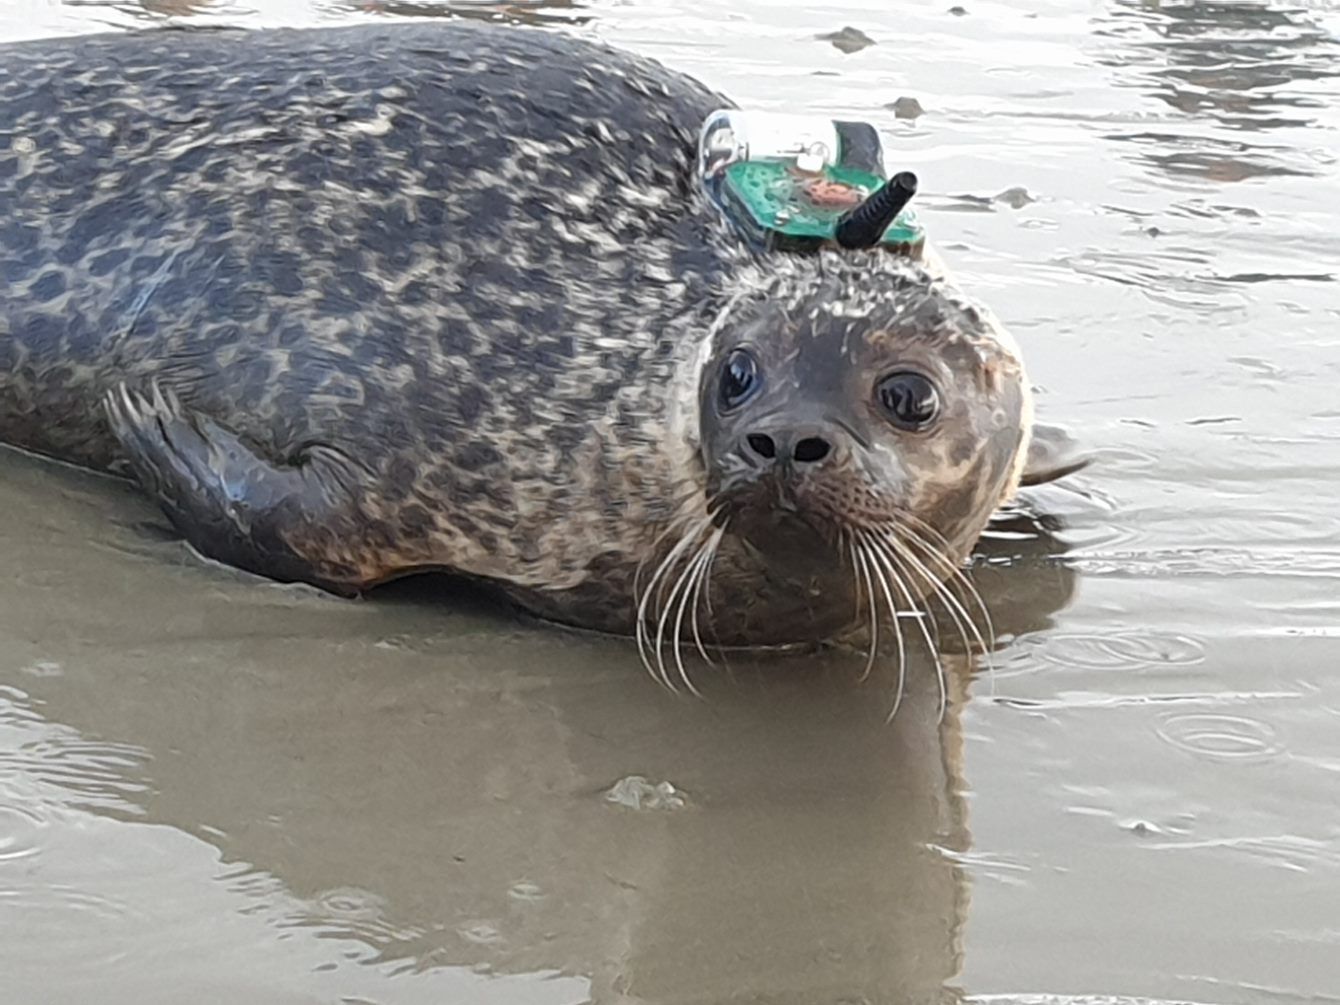 Tracker that is used attached to a seals head